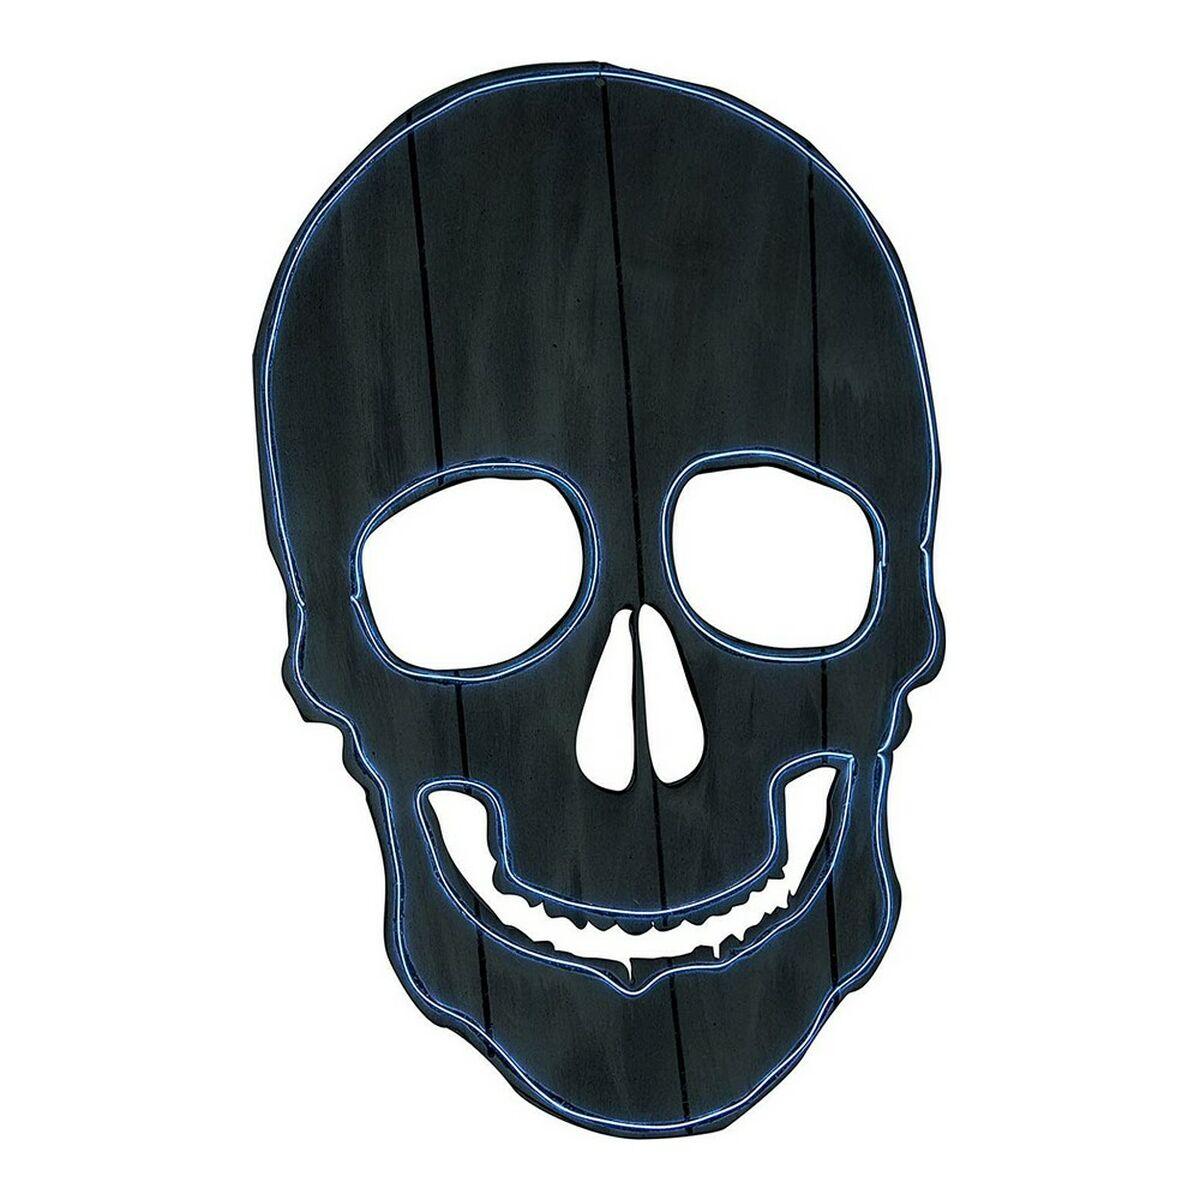 Skull My Other Me Halloween Decorations Neon Silhouette of lights - VirtuousWares:Global